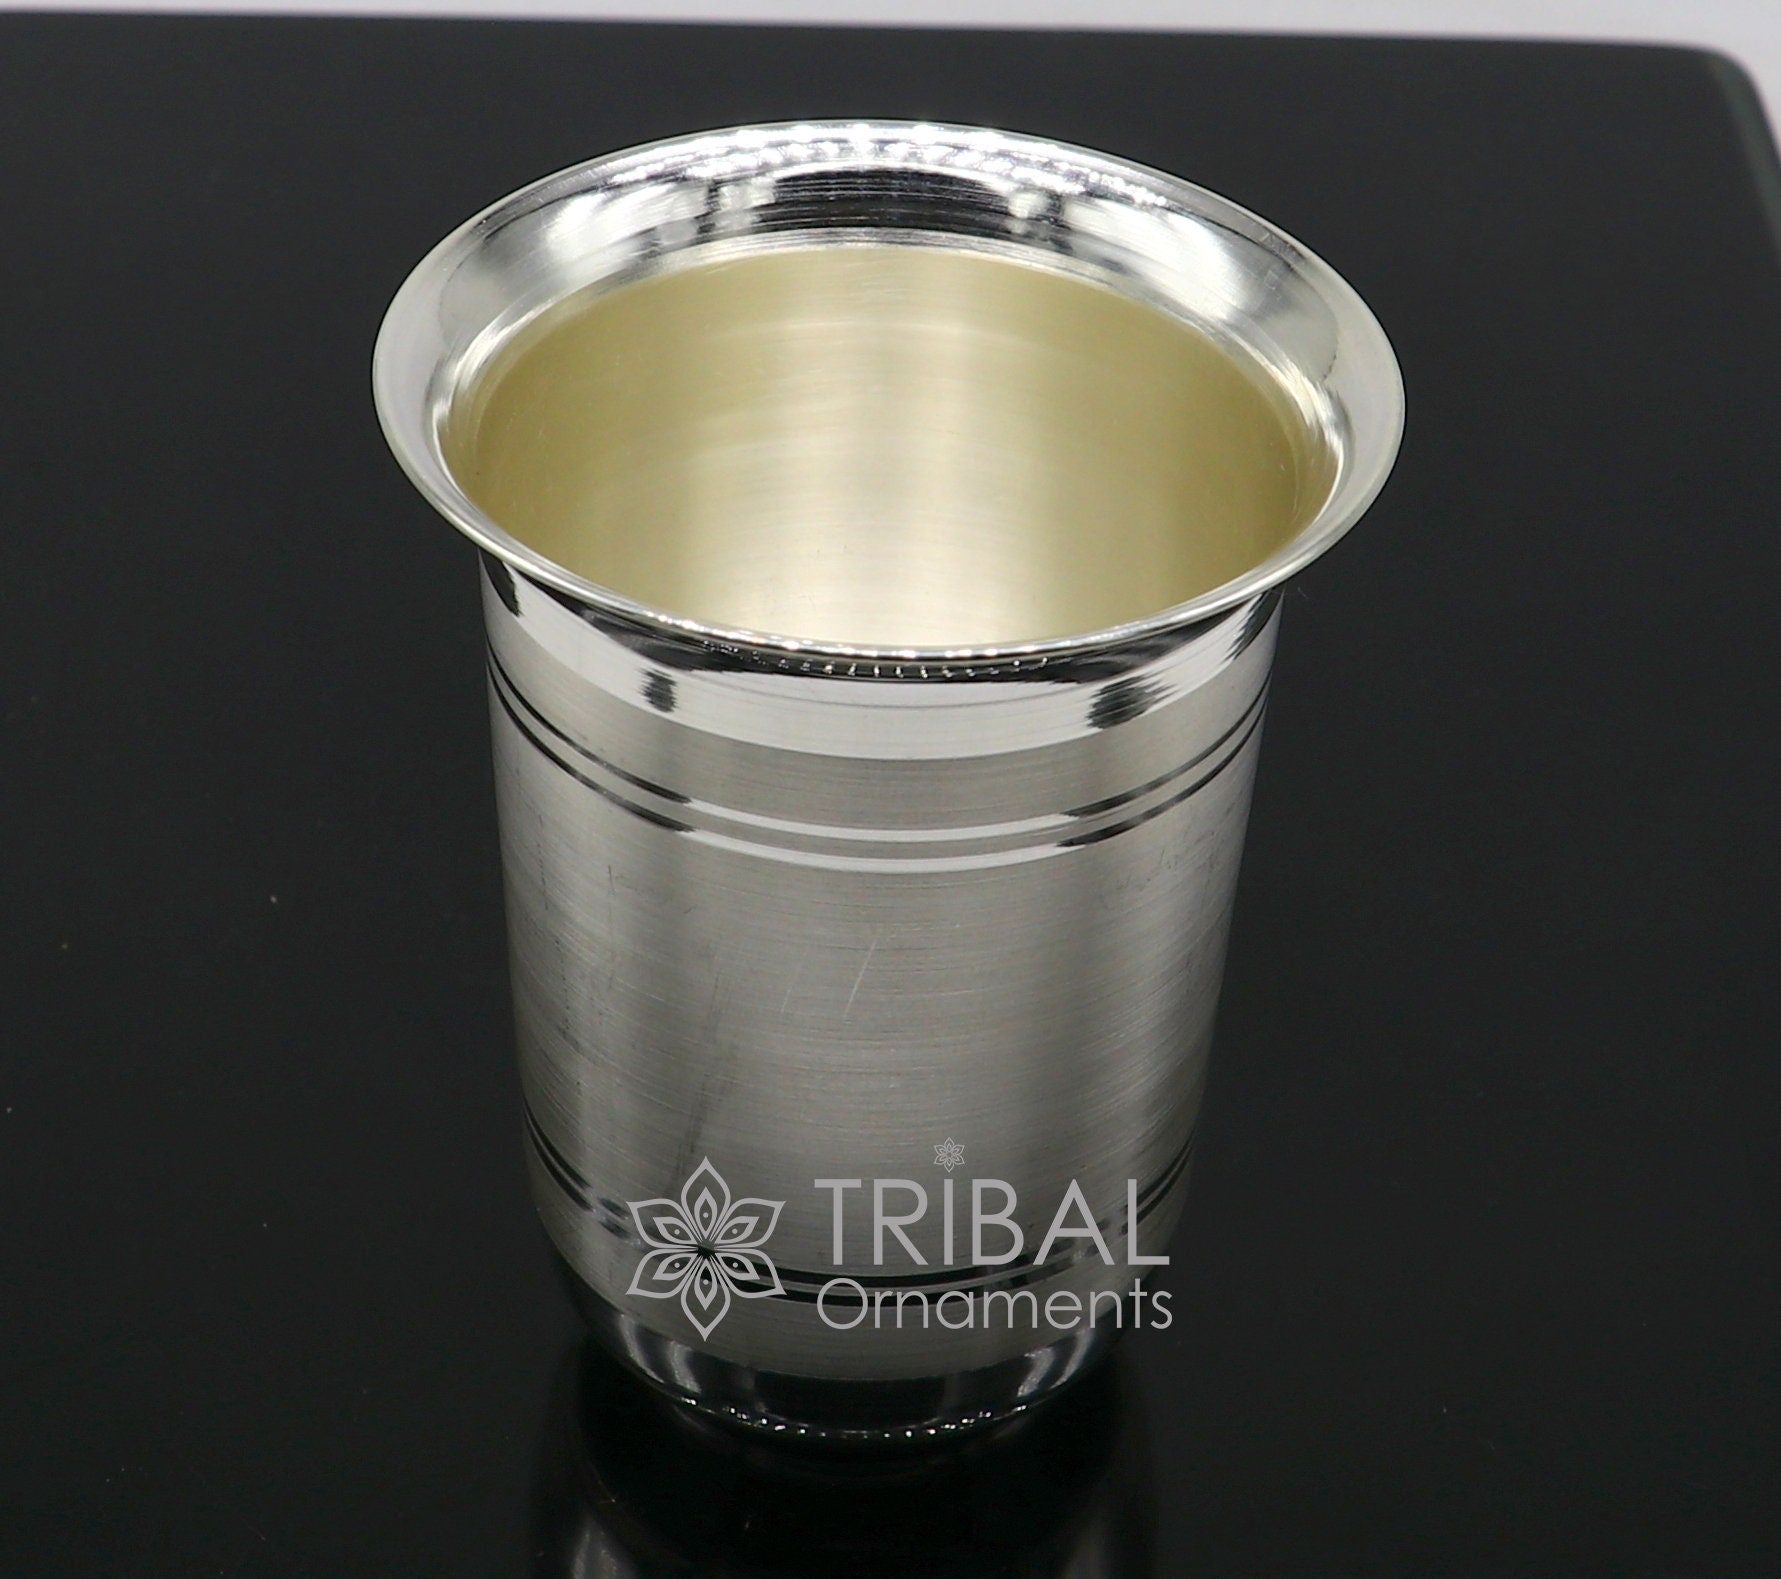 999 pure silver handmade water milk glass tumbler, all sizes silver tumbler, silver baby food dining flask, silver utensils gift sv273 - TRIBAL ORNAMENTS